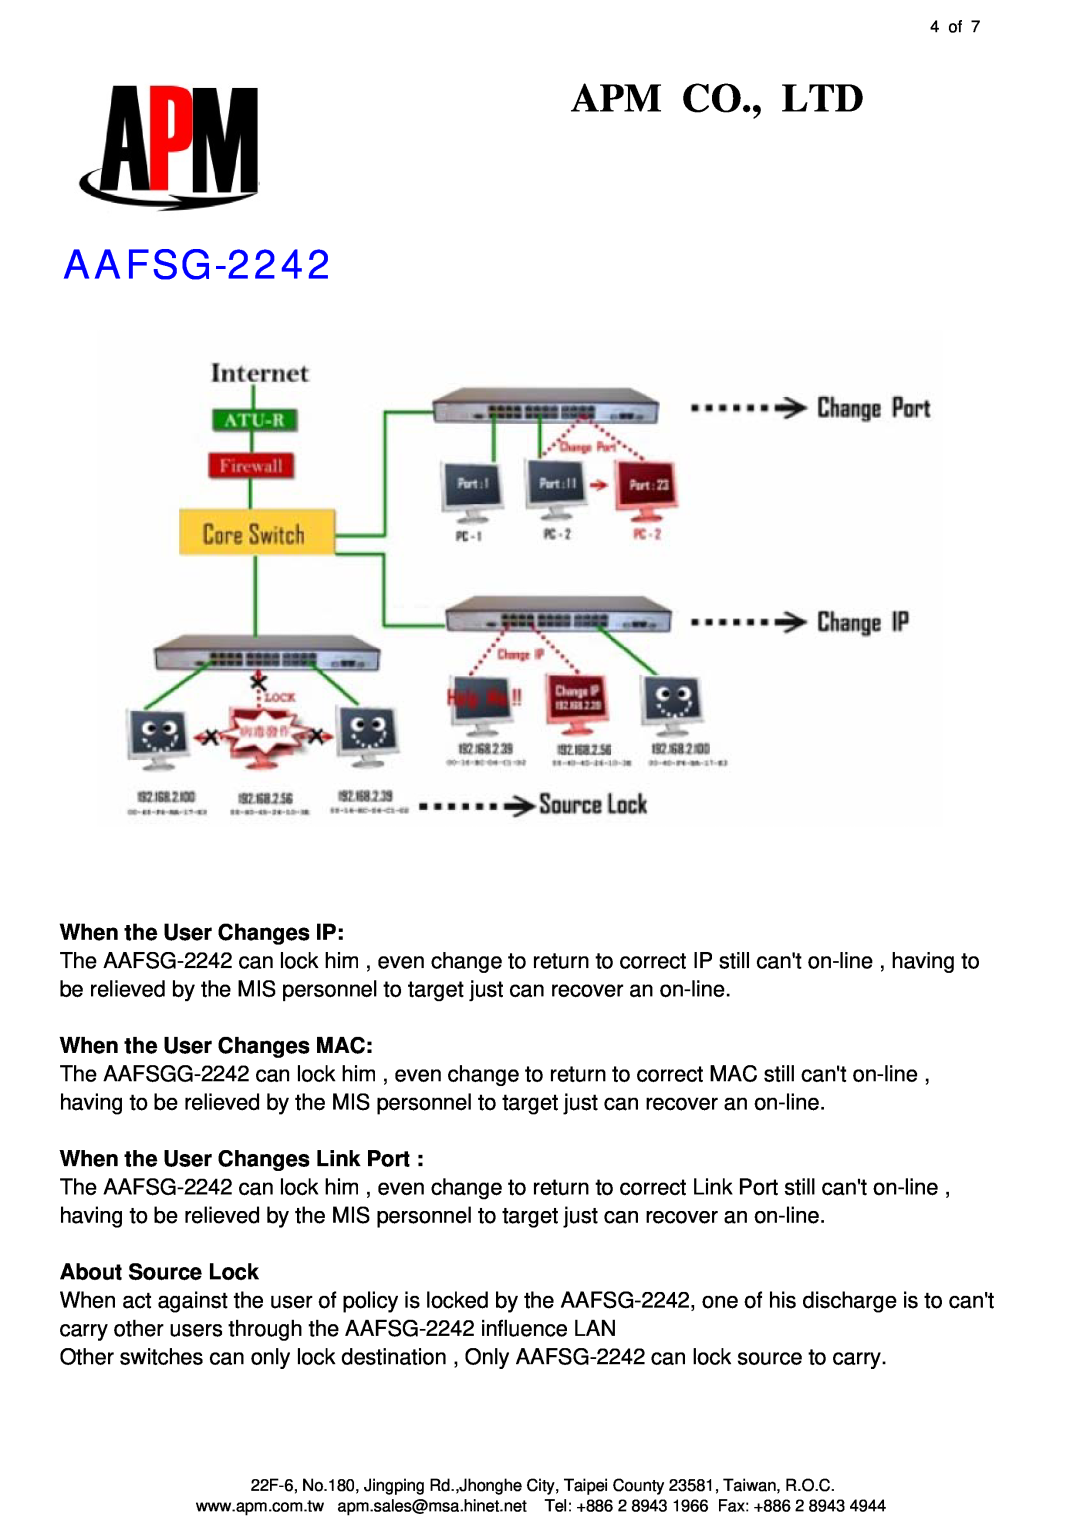 APM AAFSG-2242 When the User Changes IP, When the User Changes MAC, When the User Changes Link Port, About Source Lock 